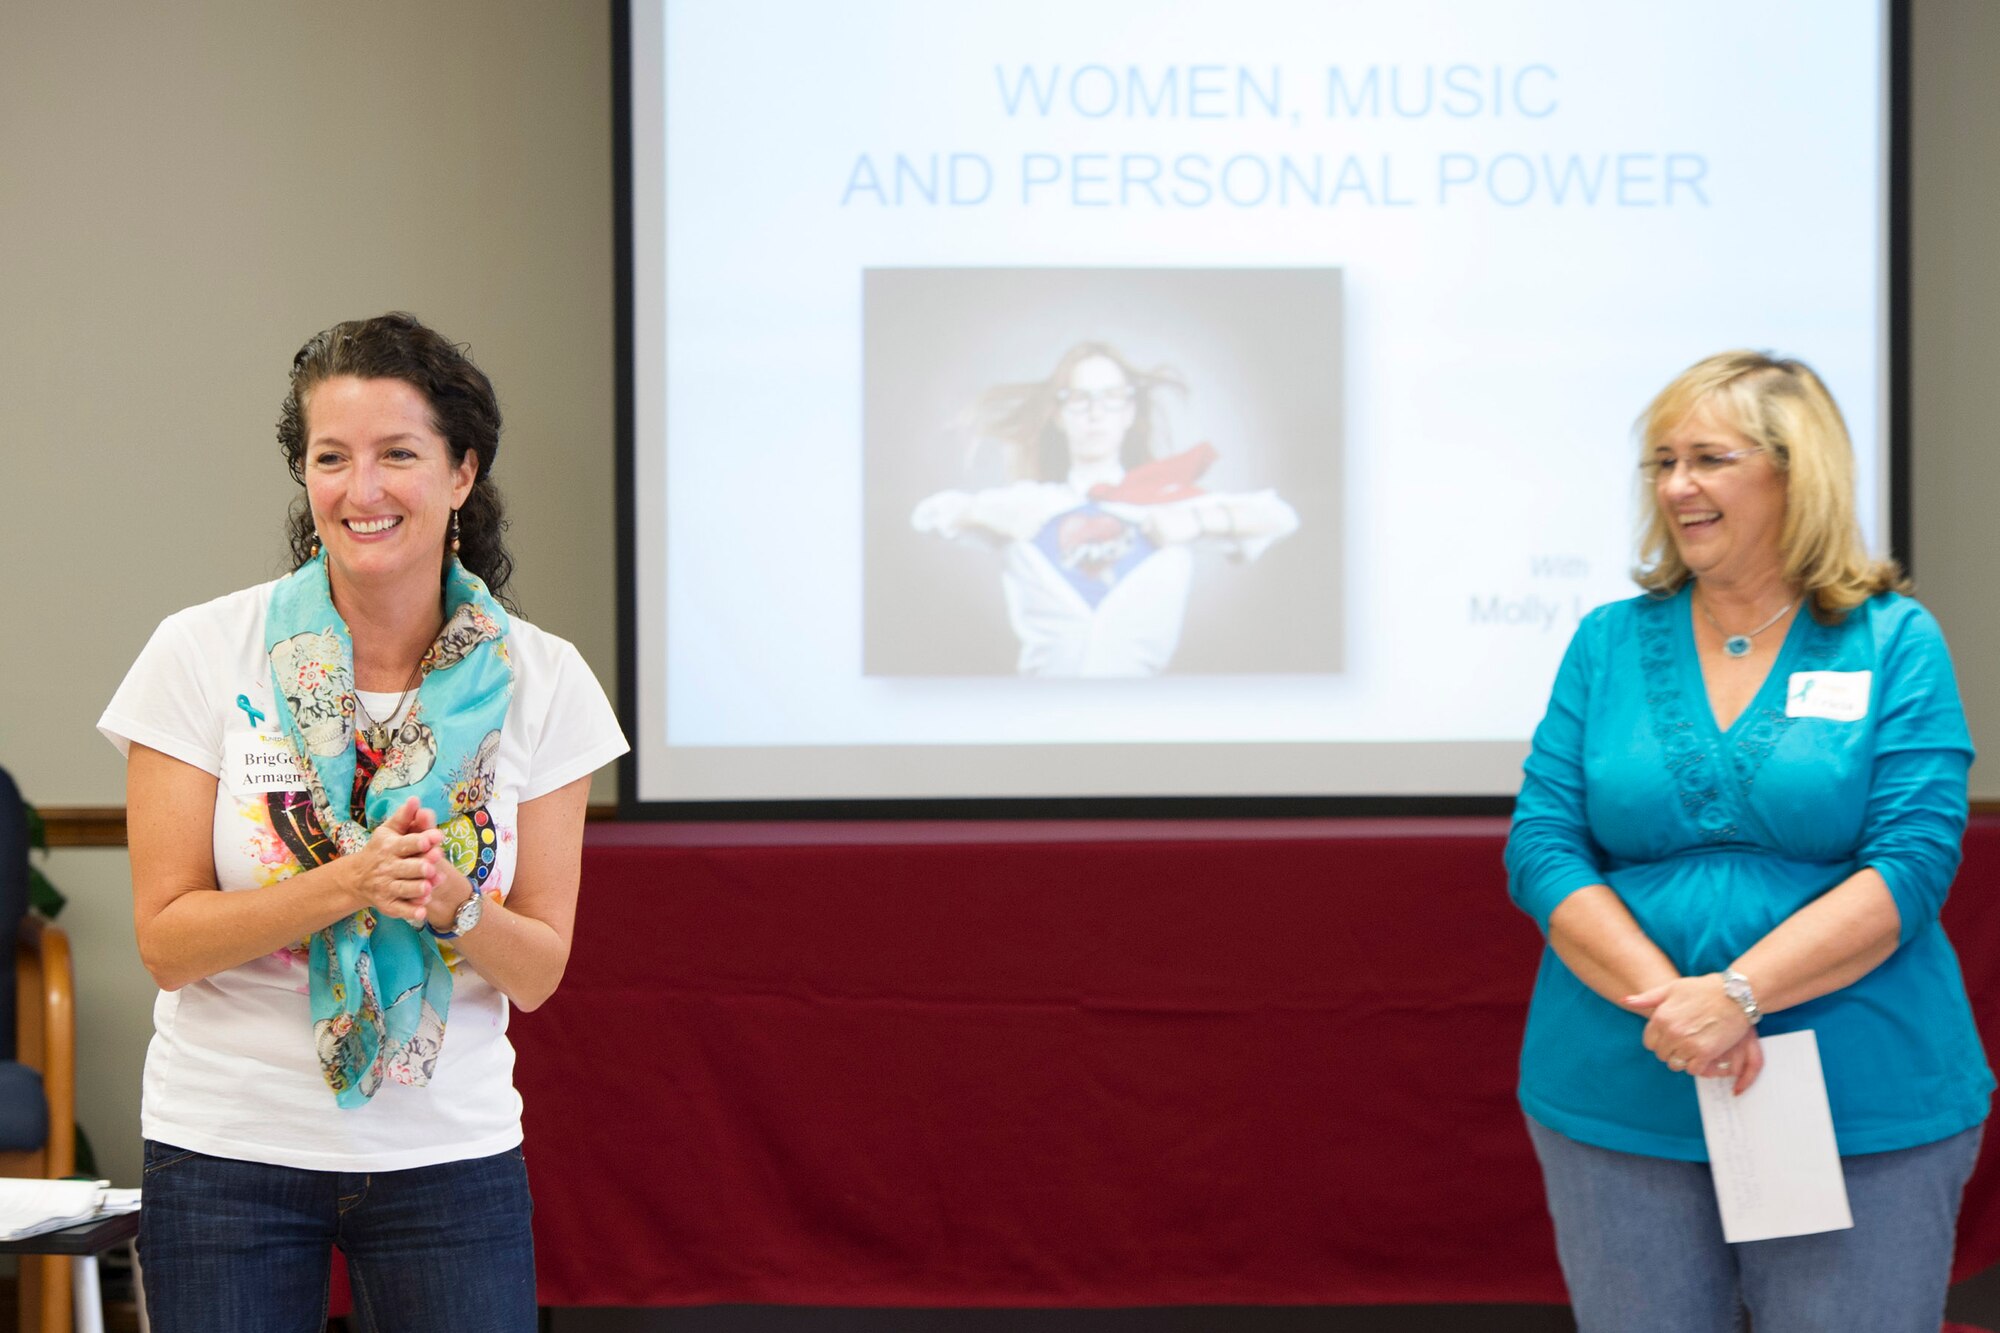 (right) Patricia Gragg, 45th Space Wing Sexual Assault Response Coordinator, welcomes Brig. Gen. Nina Armagno, 45th Space Wing commander, and guests, to a workshop geared toward women, music & personal power, Nov. 7, 2014, at Patrick Air Force Base, Fla. In conjunction with the workshop, Team Patrick-Cape was authorized to wear denim jeans in observance of Denim Day, to recognize the importance of preventing sexual assault. (U.S. Air Force photo/Matthew Jurgens) 